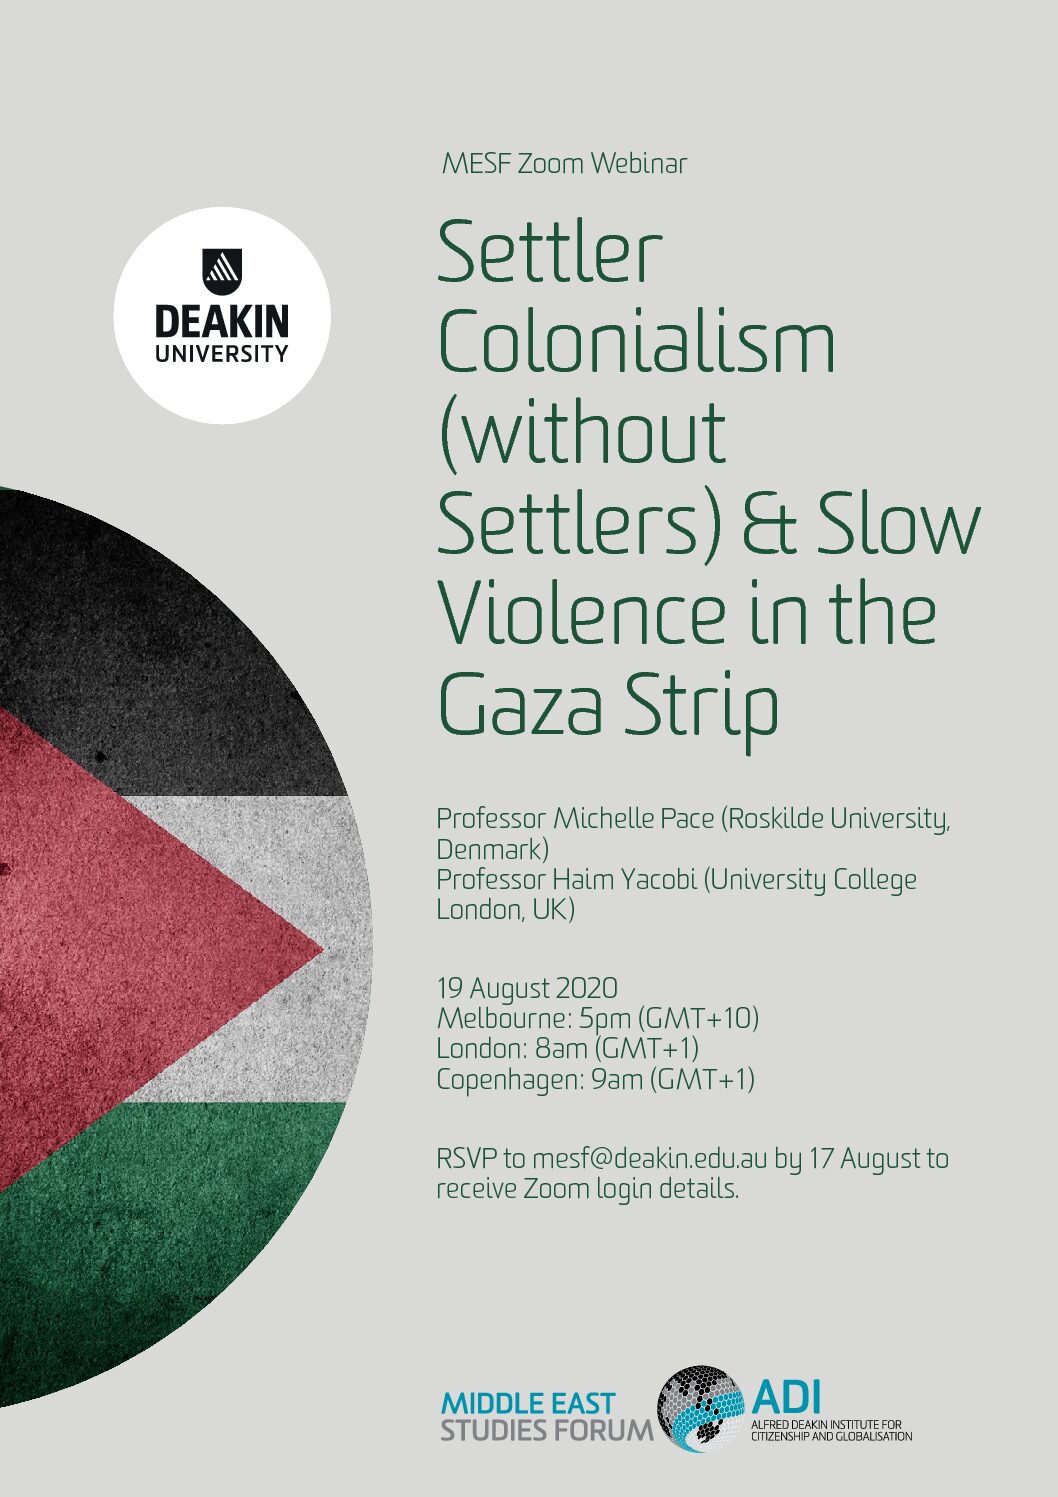 Professor Michelle Pace was a speaker at the webinar “Settler Colonialism (without Settlers) & Slow Violence in the Gaza Strip”​